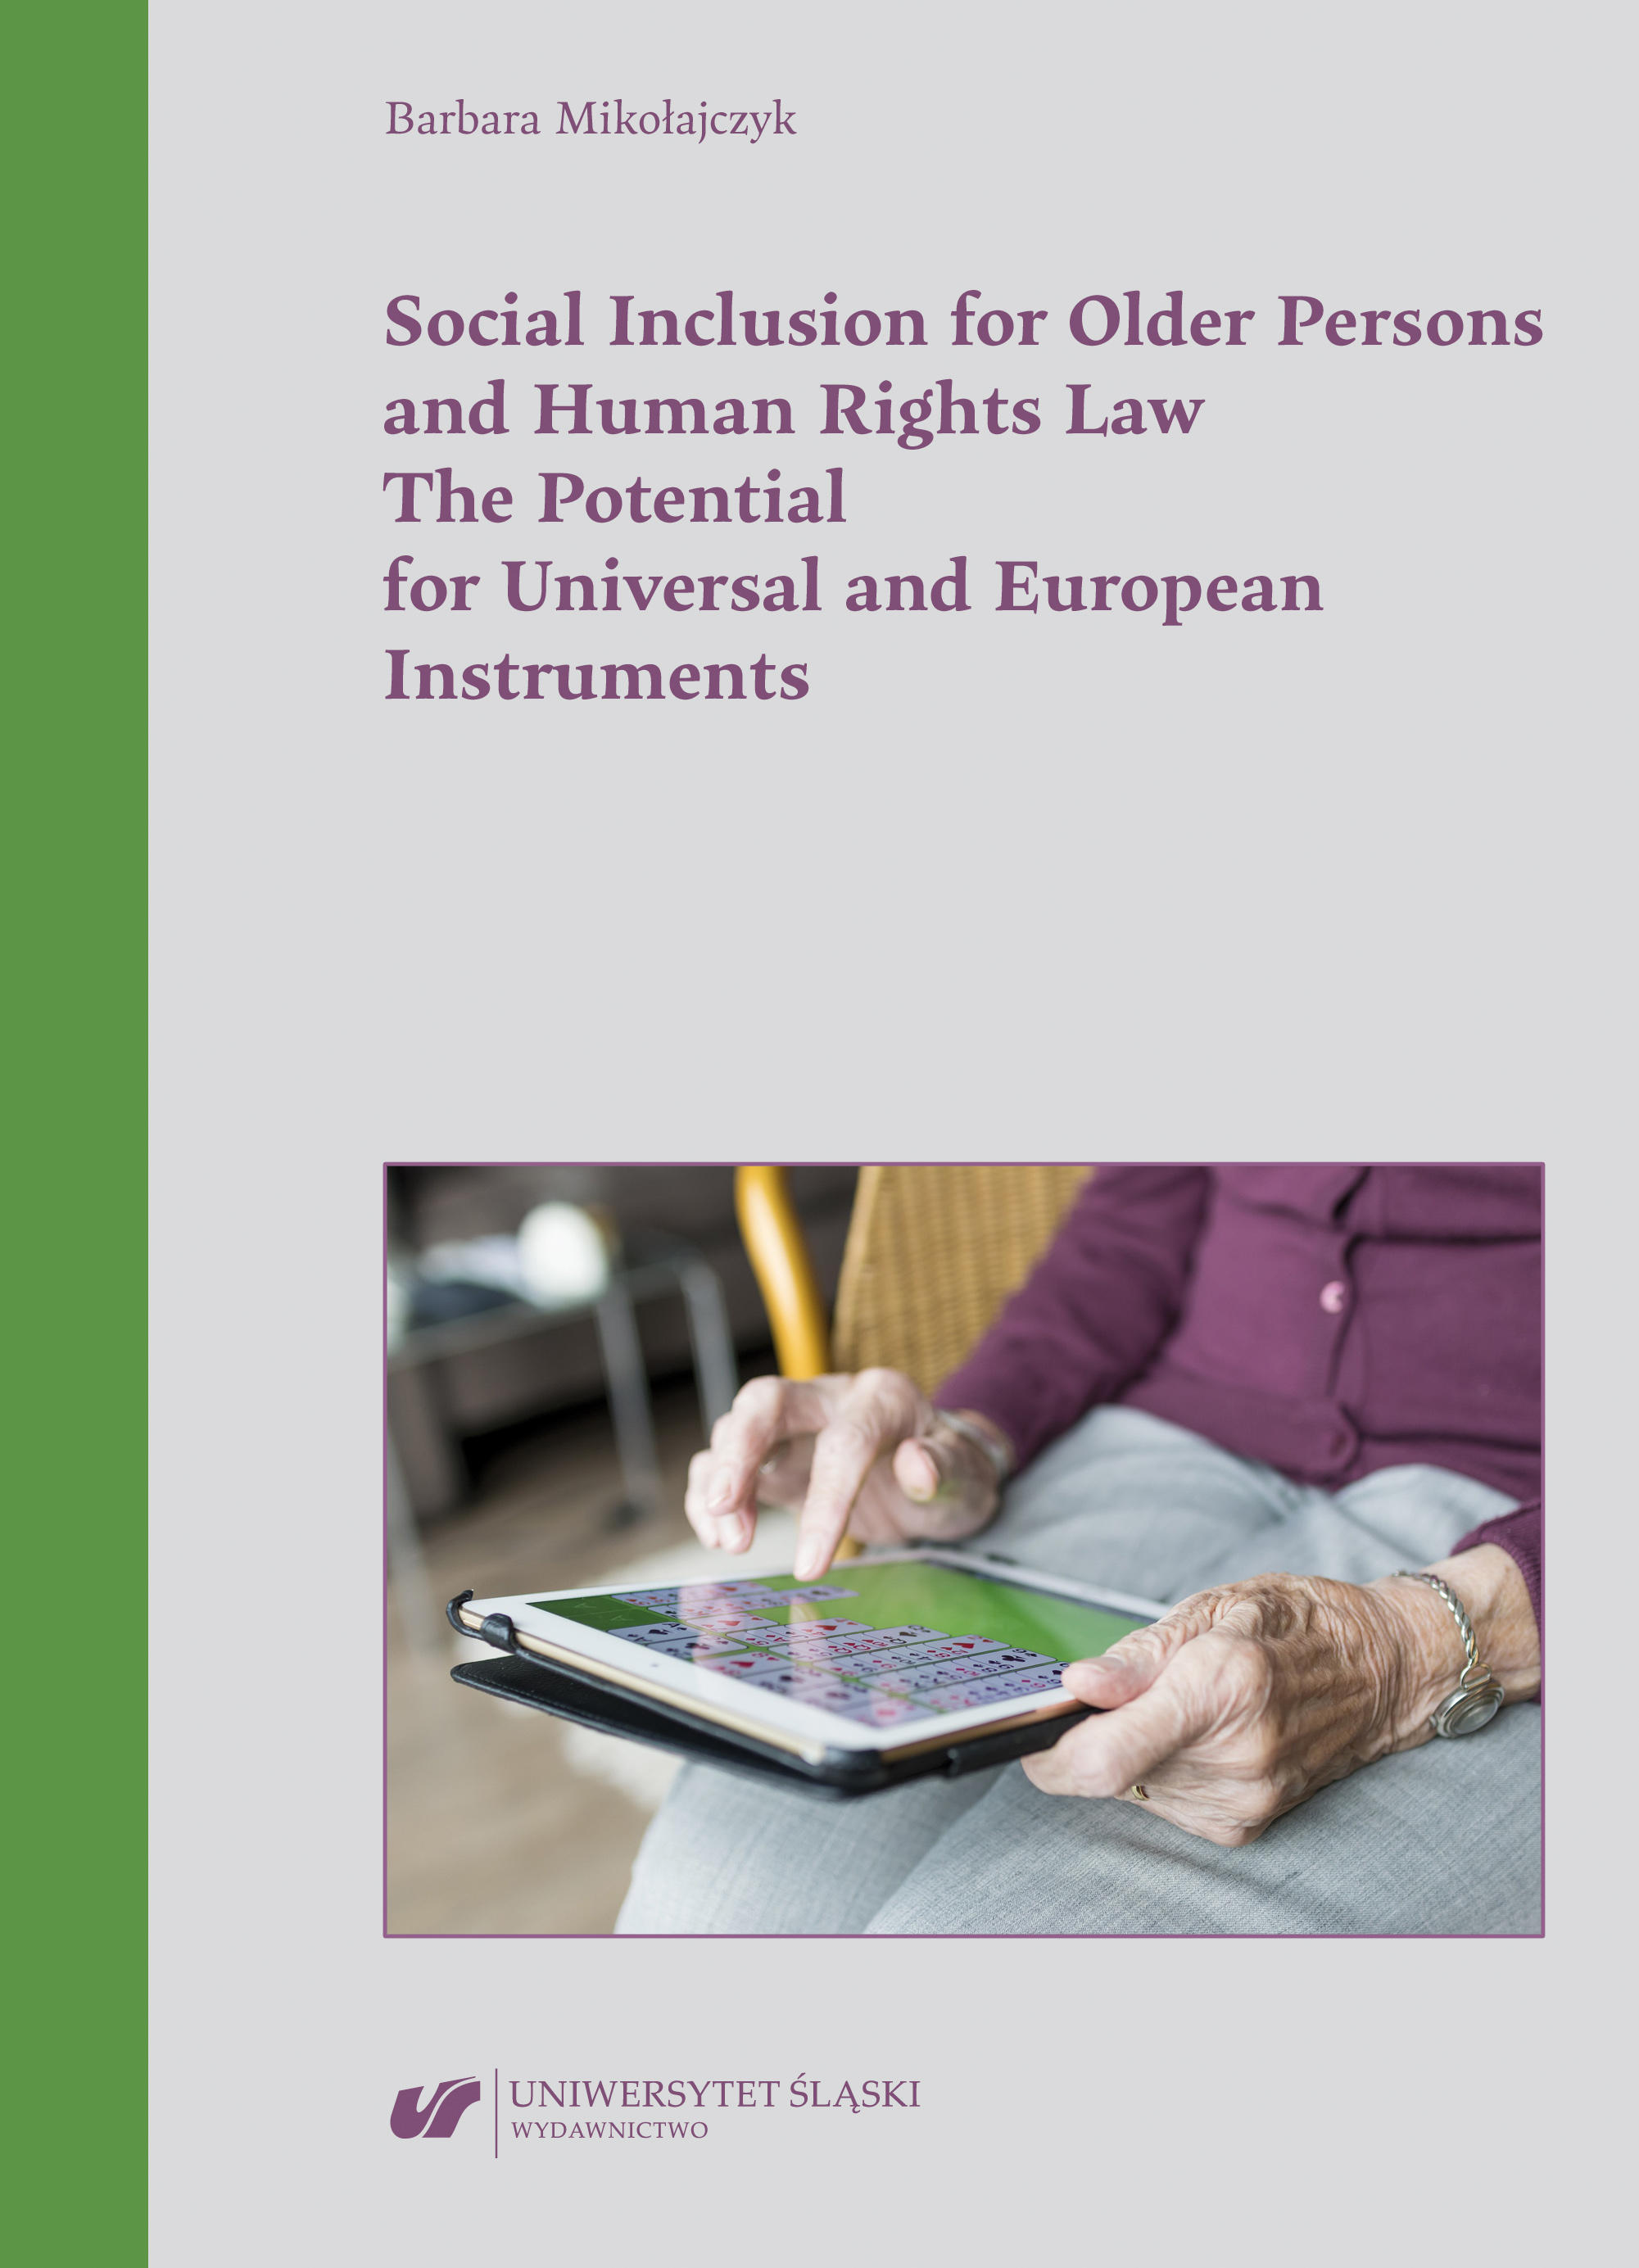 Social Inclusion for Older Persons and Human Rights Law. The Potential for Universal and European Instruments Cover Image